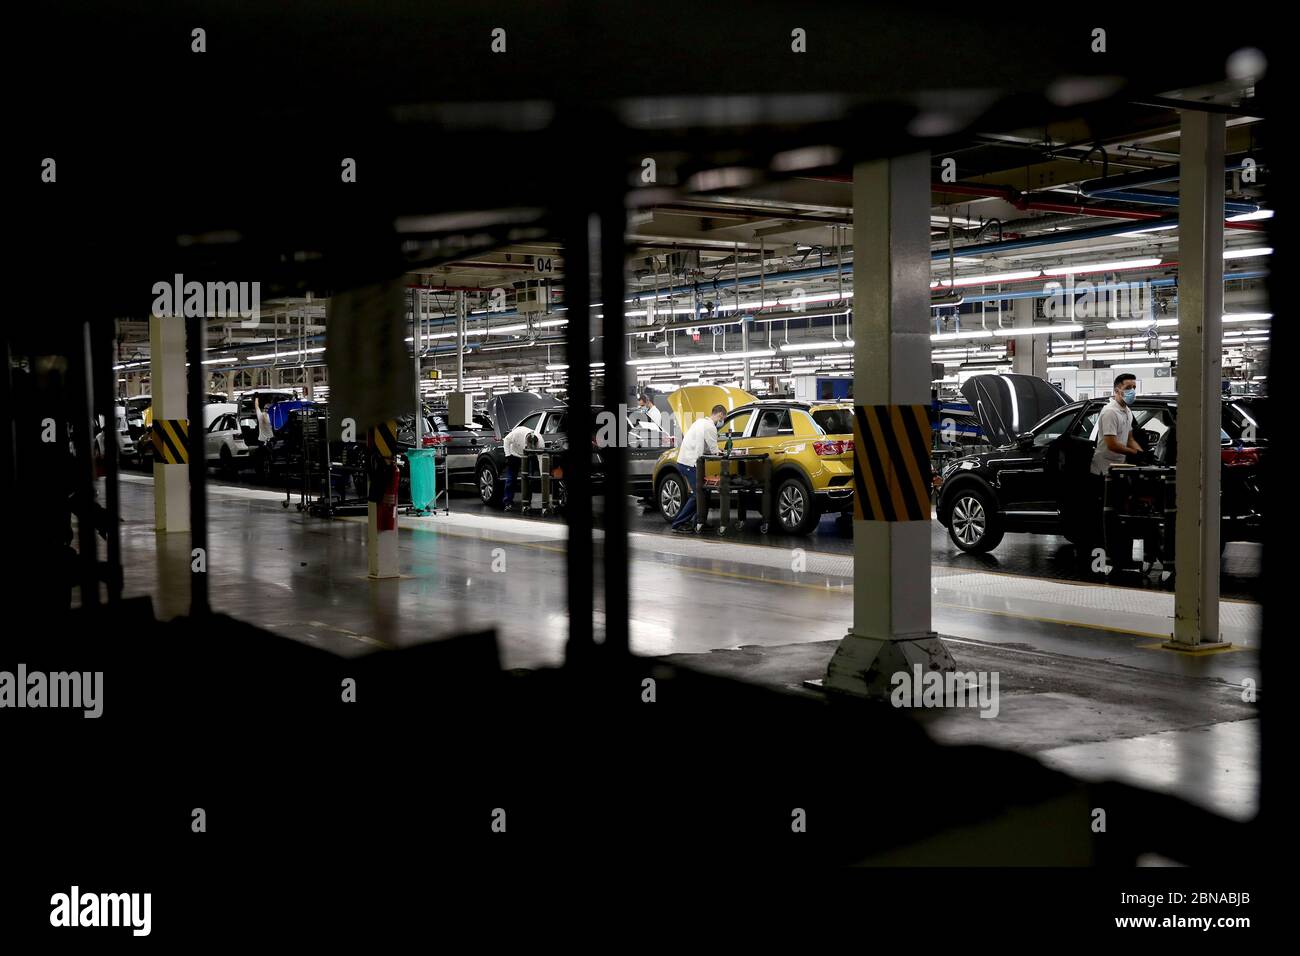 Lisbon, Portugal. 13th May, 2020. Employees wearing face masks work on the assembly line at the Volkswagen Autoeuropa car factory in Palmela, Portugal, May 13, 2020. Portuguese President Marcelo Rebelo de Sousa and Prime Minister Antonio Costa on Wednesday encouraged all industries to restart under strict conditions amid the COVID-19 pandemic, Lusa News Agency reported. After their joint visit to automotive assembly plant Autoeuropa, the two leaders expressed their confidence in the resumption of production for the car producer. Credit: Pedro Fiuza/Xinhua/Alamy Live News Stock Photo